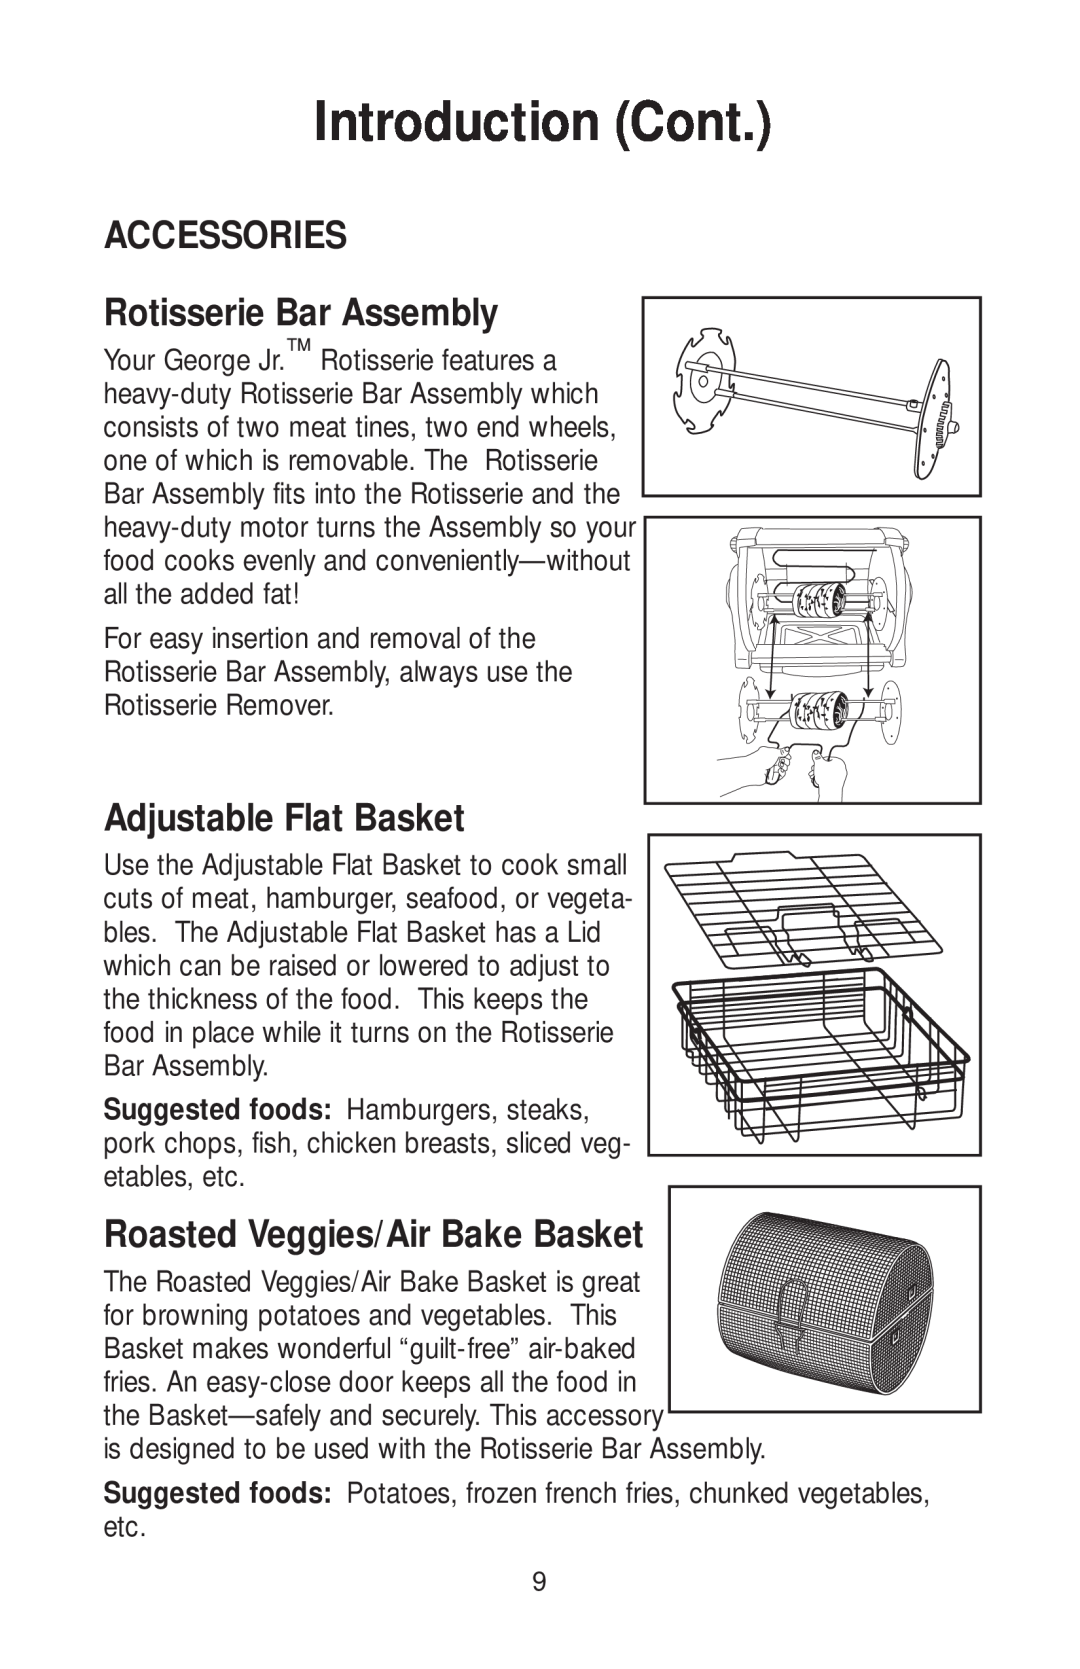 George Foreman GR82 owner manual Introduction Cont, ACCESSORIES Rotisserie Bar Assembly, Adjustable Flat Basket 